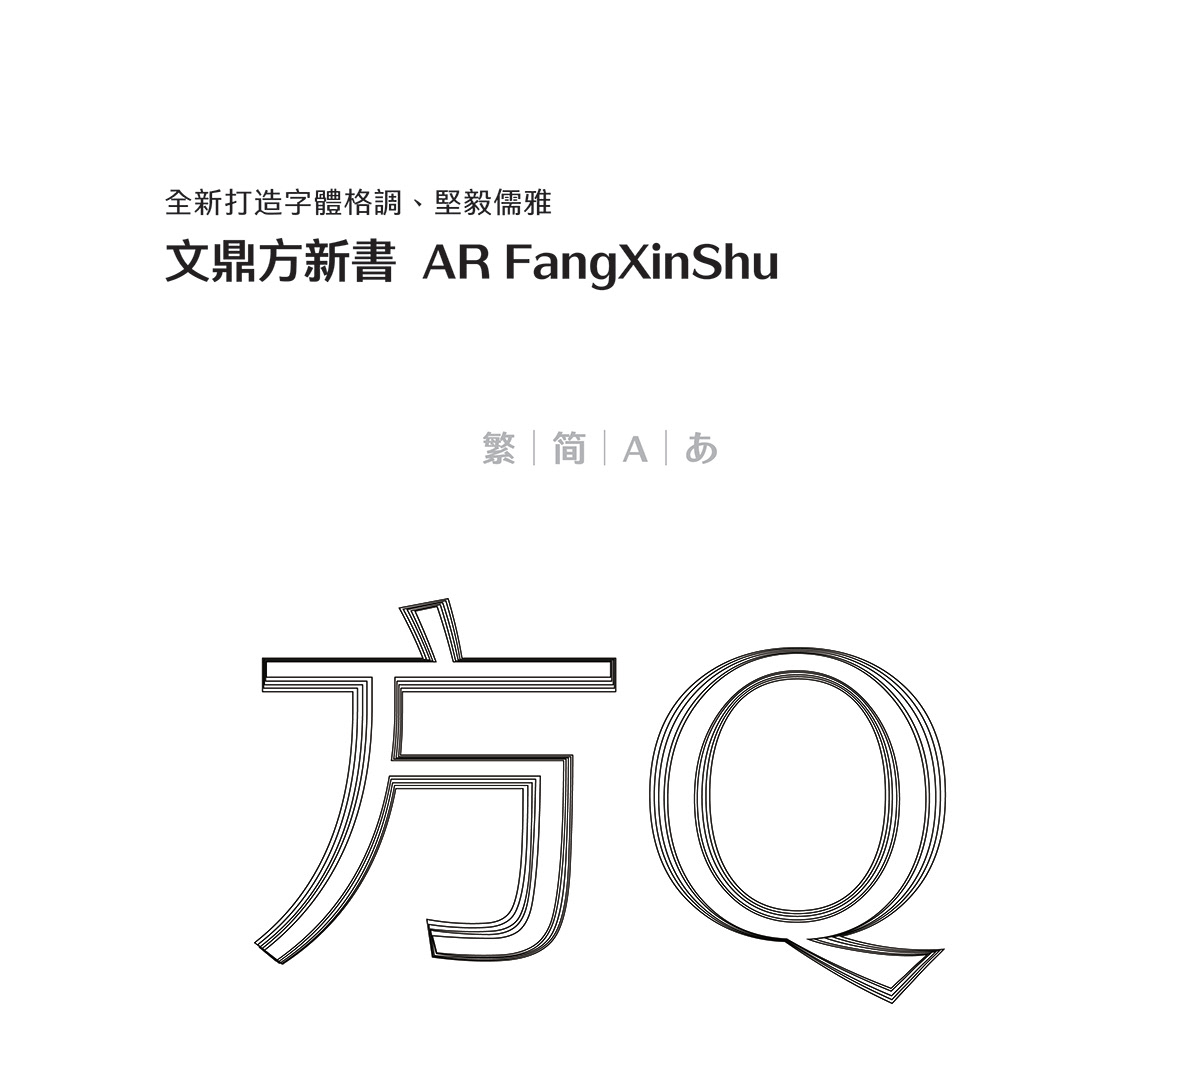 font 人文 文青 chinese Typgraphy taiwan design